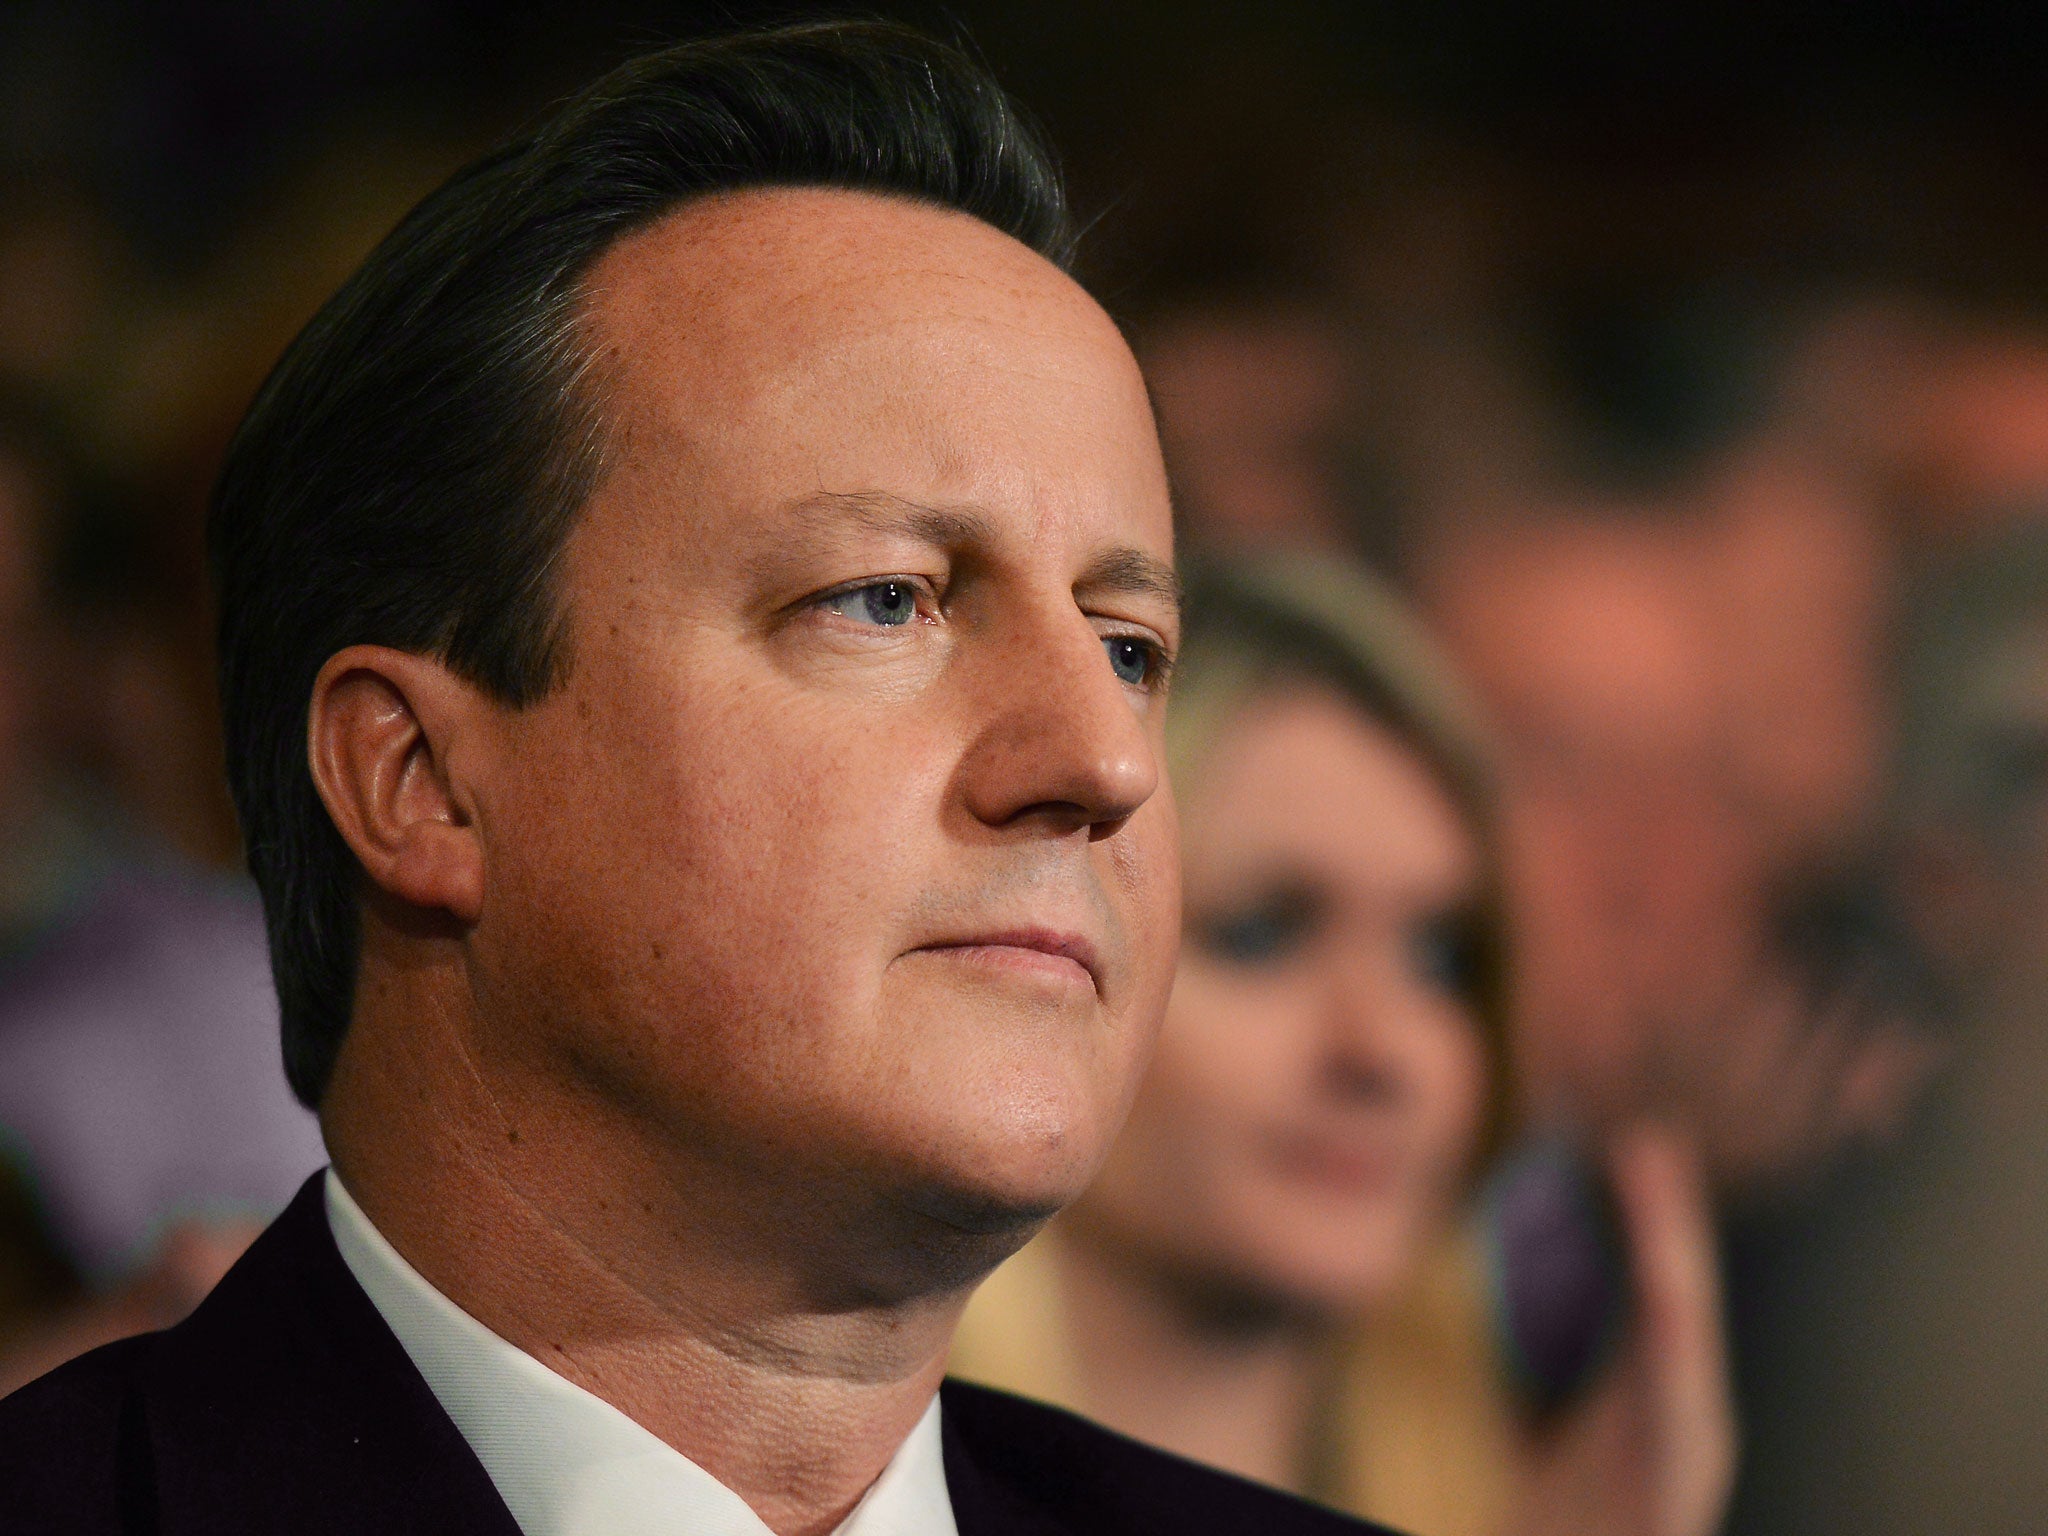 Cameron's party is perceived by a majority of the public to only represent the interests of the rich